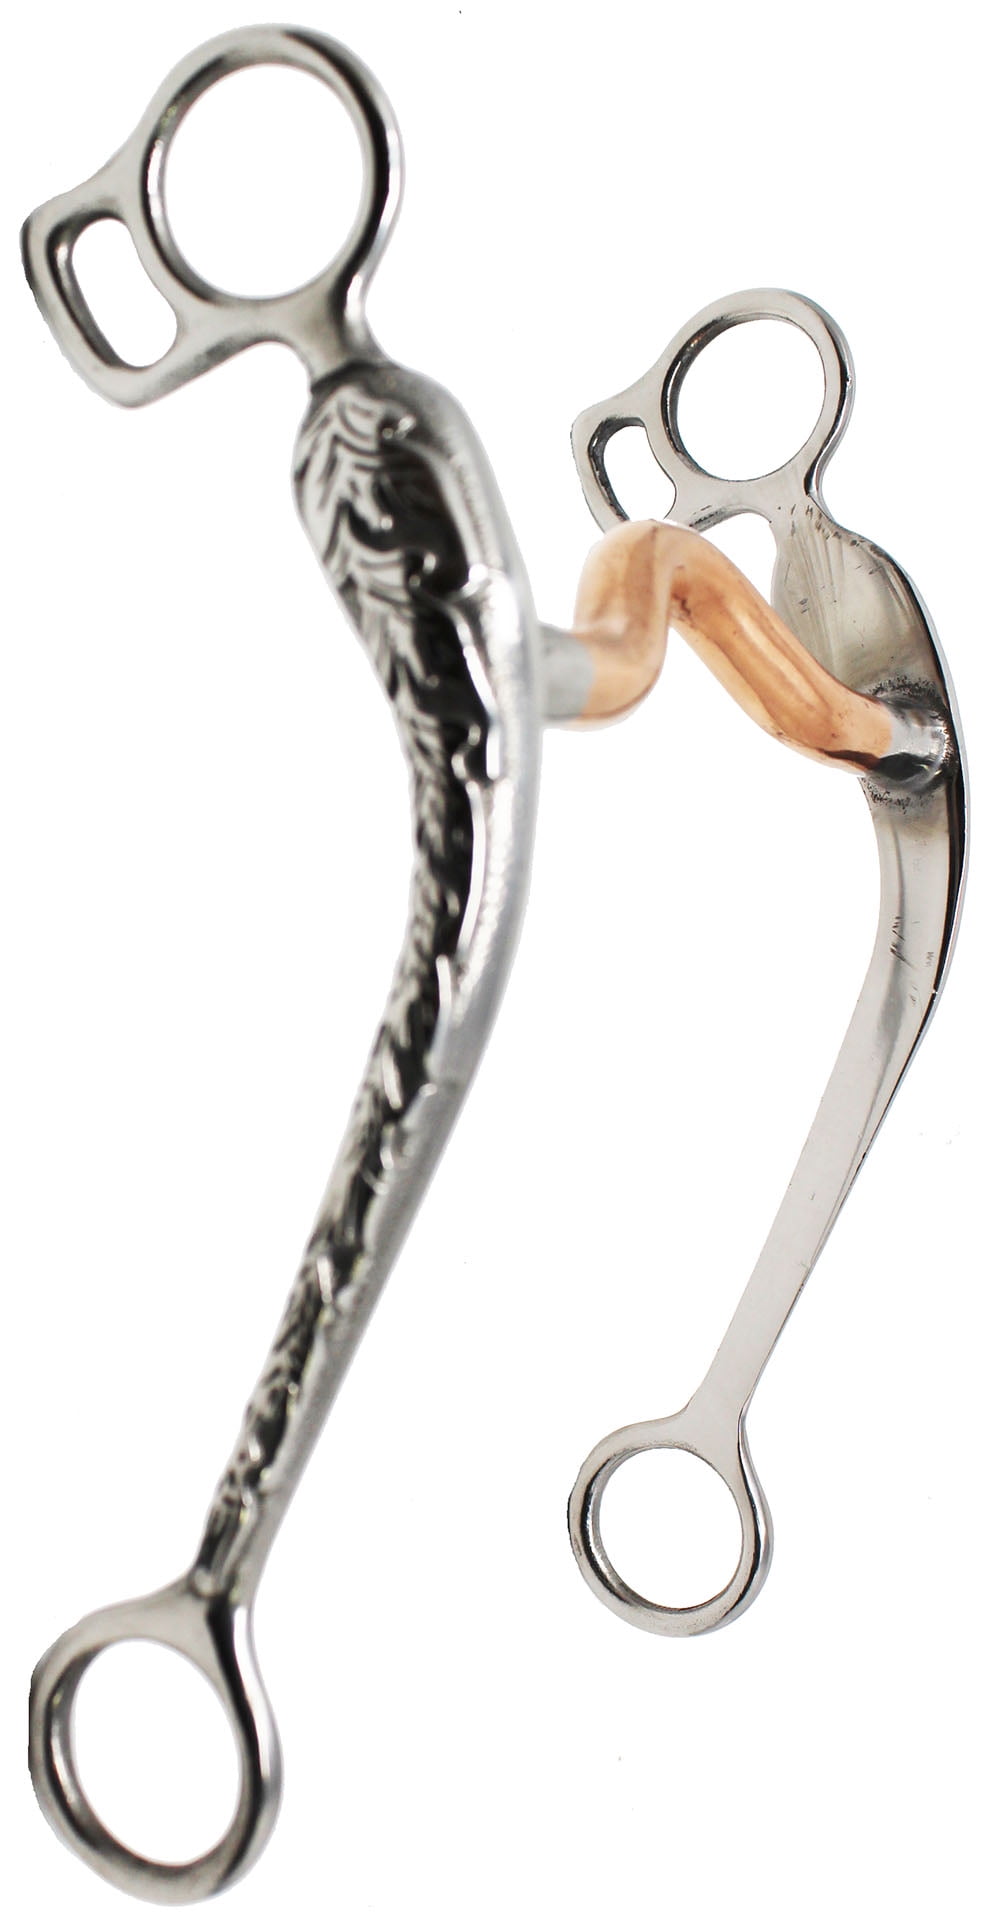 Tackmaster Challenger Stainless Steel 5 Mouth Eggbutt Snaffle Horse Bit 35446